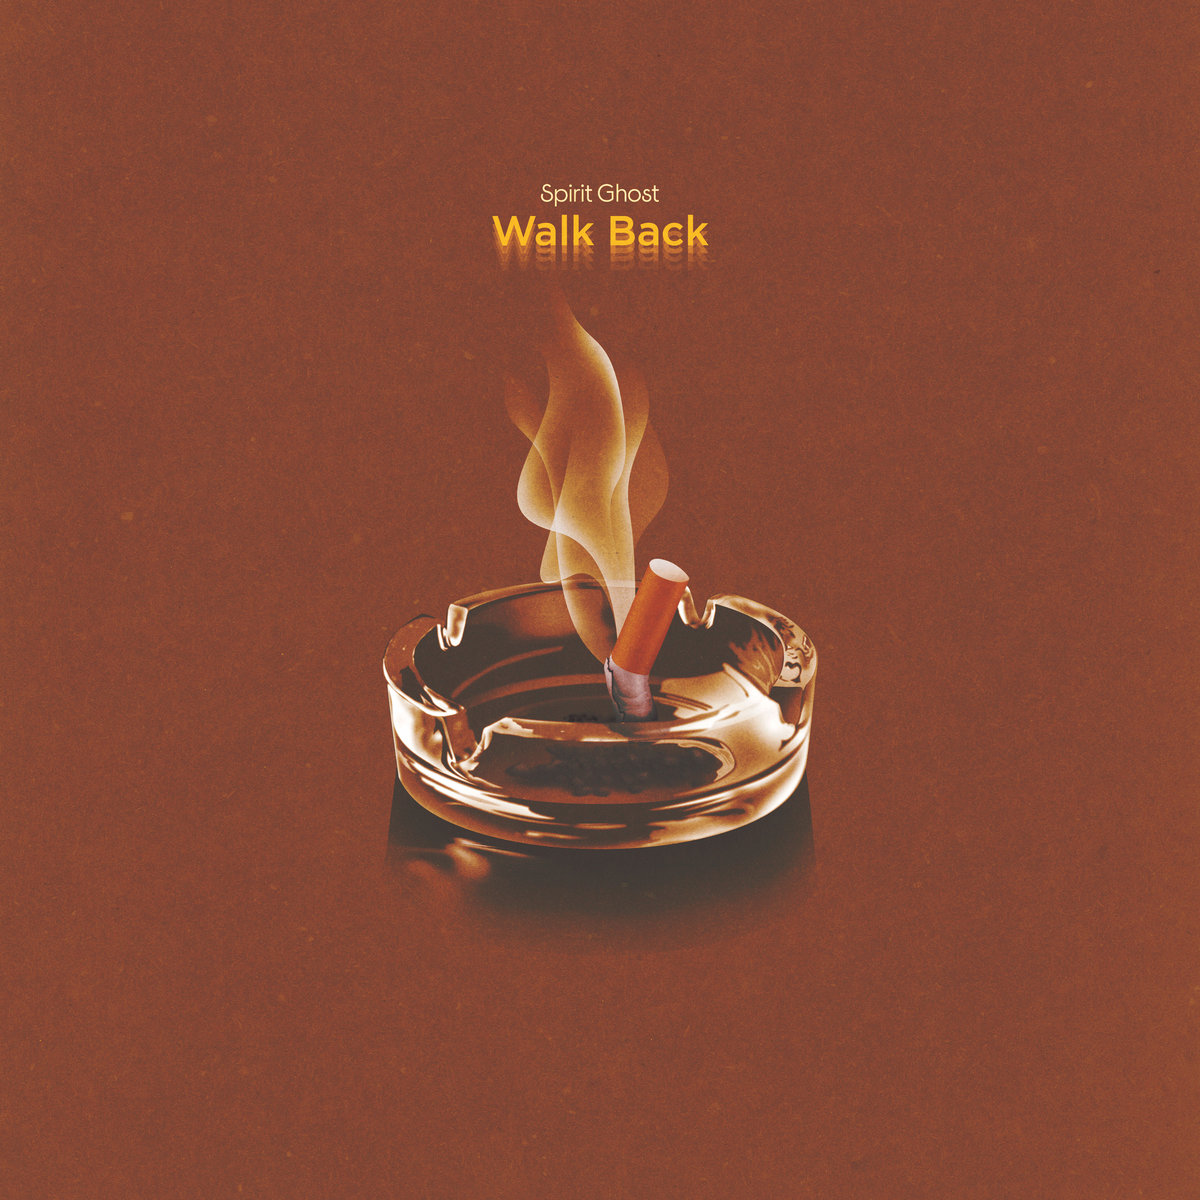 single artwork for walk back by spirit ghost - illustration of a cigarette in an ashtray on a orange-brown background